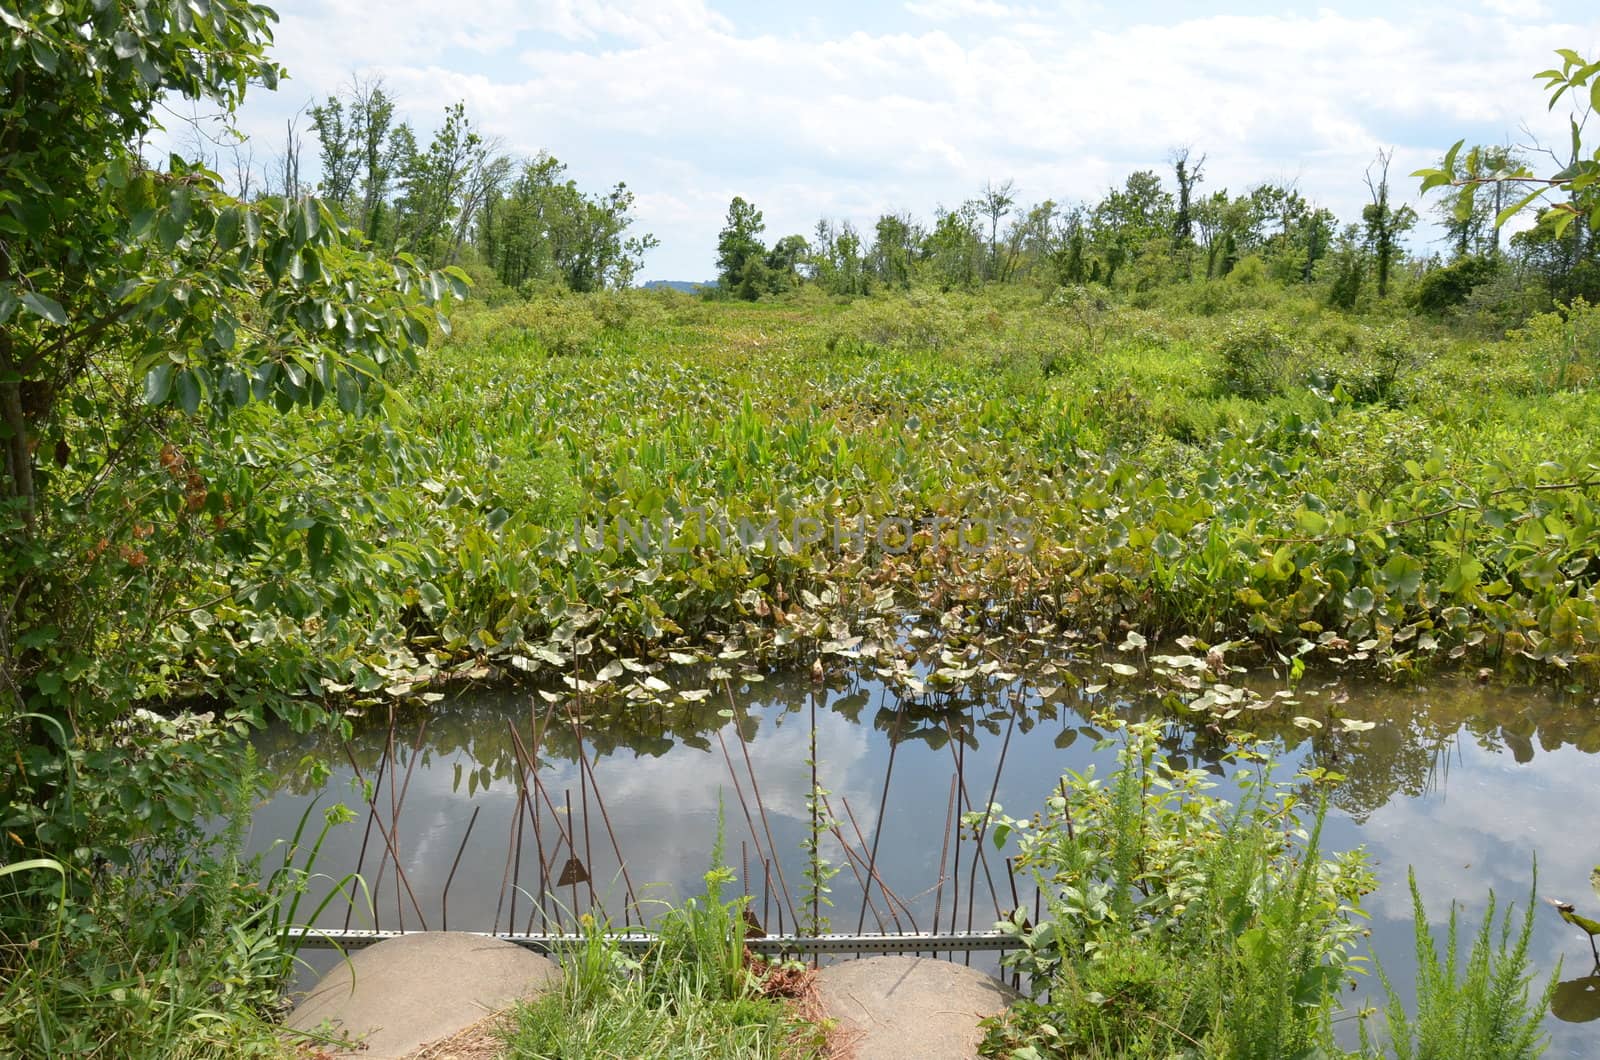 green lily pads and water with metal bars in wetland or marsh environment